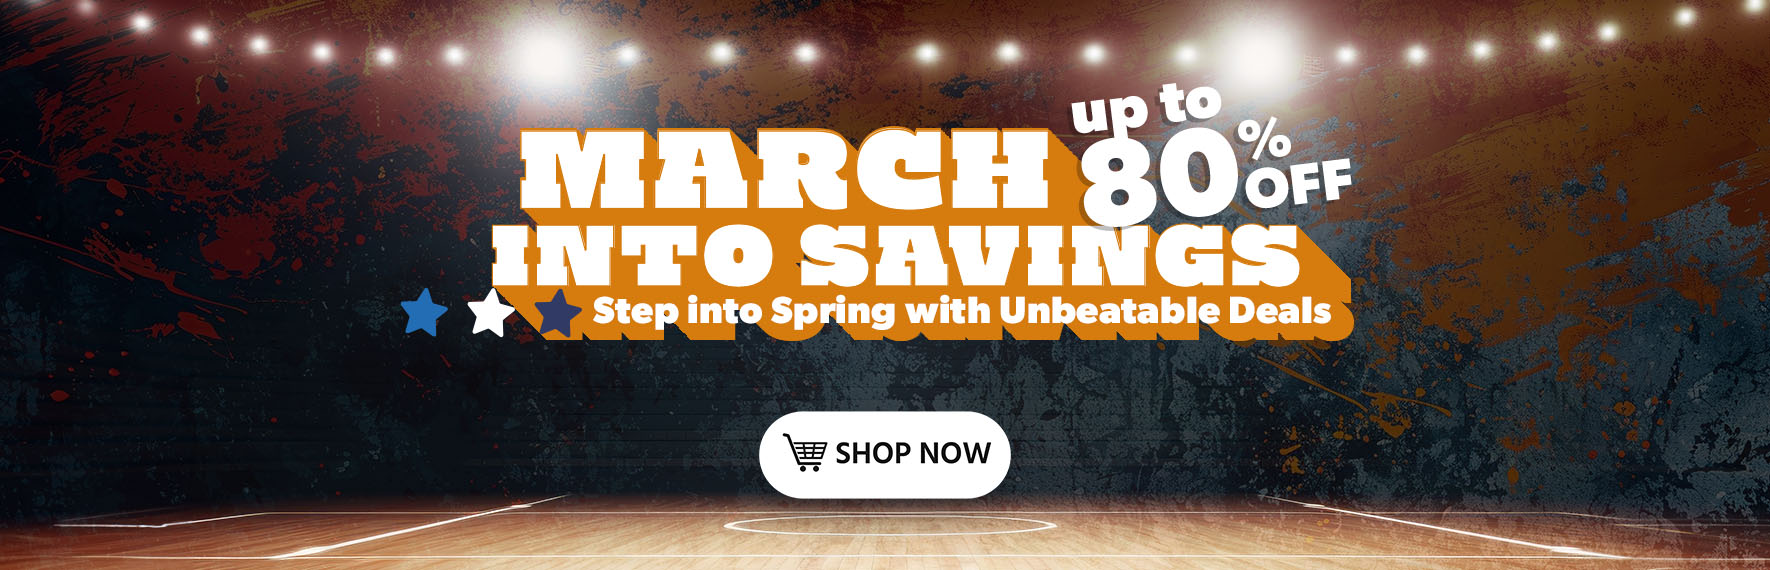 COPY March into Savings! Step into Spring with Unbeatable Deals! Up to 80% OFF Shop Now